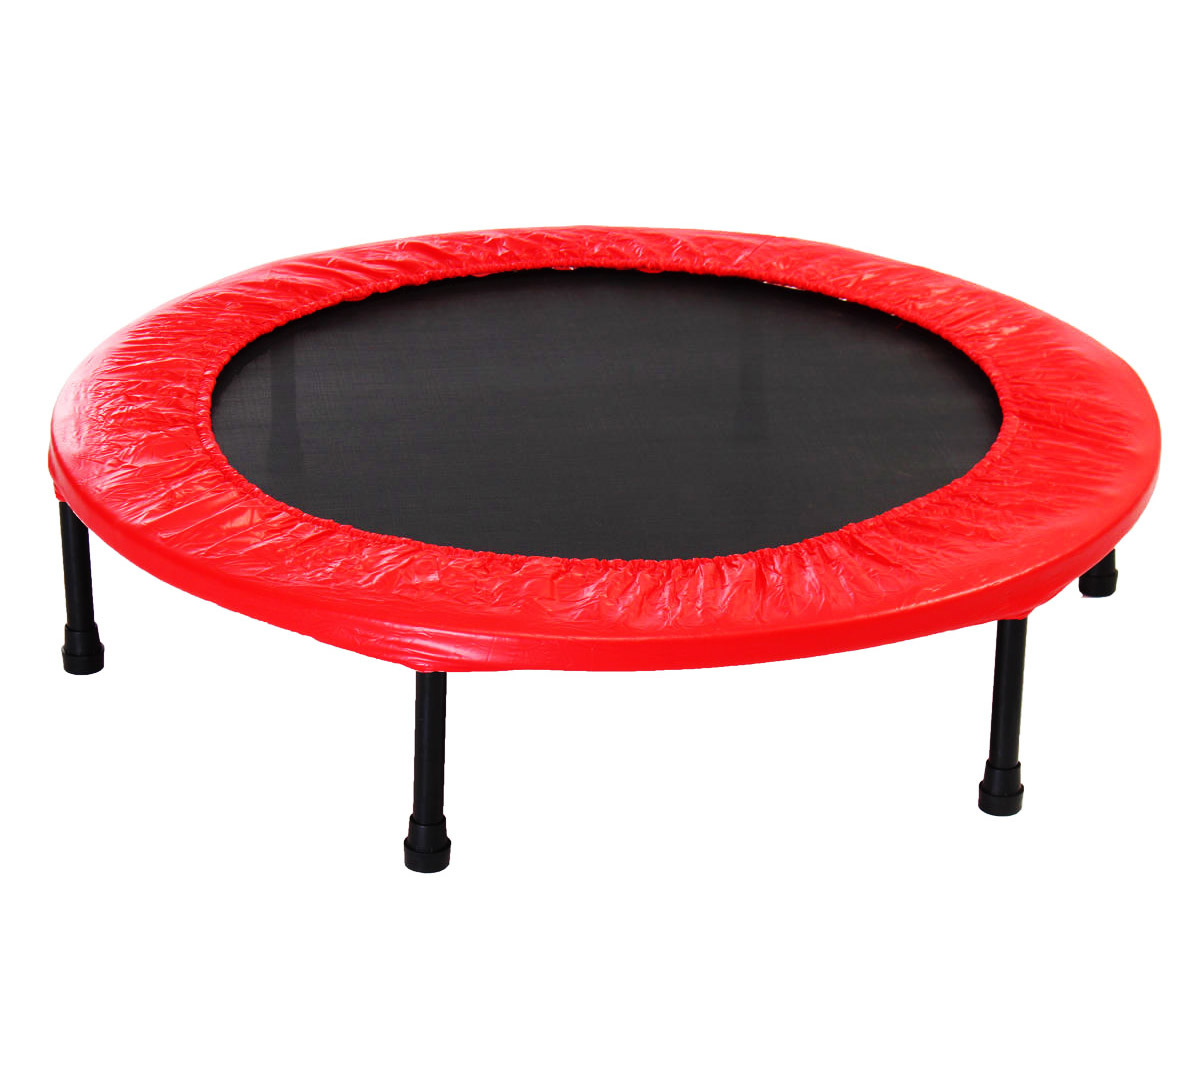 40" Mini Trampoline Home Fitness Gym (Red)